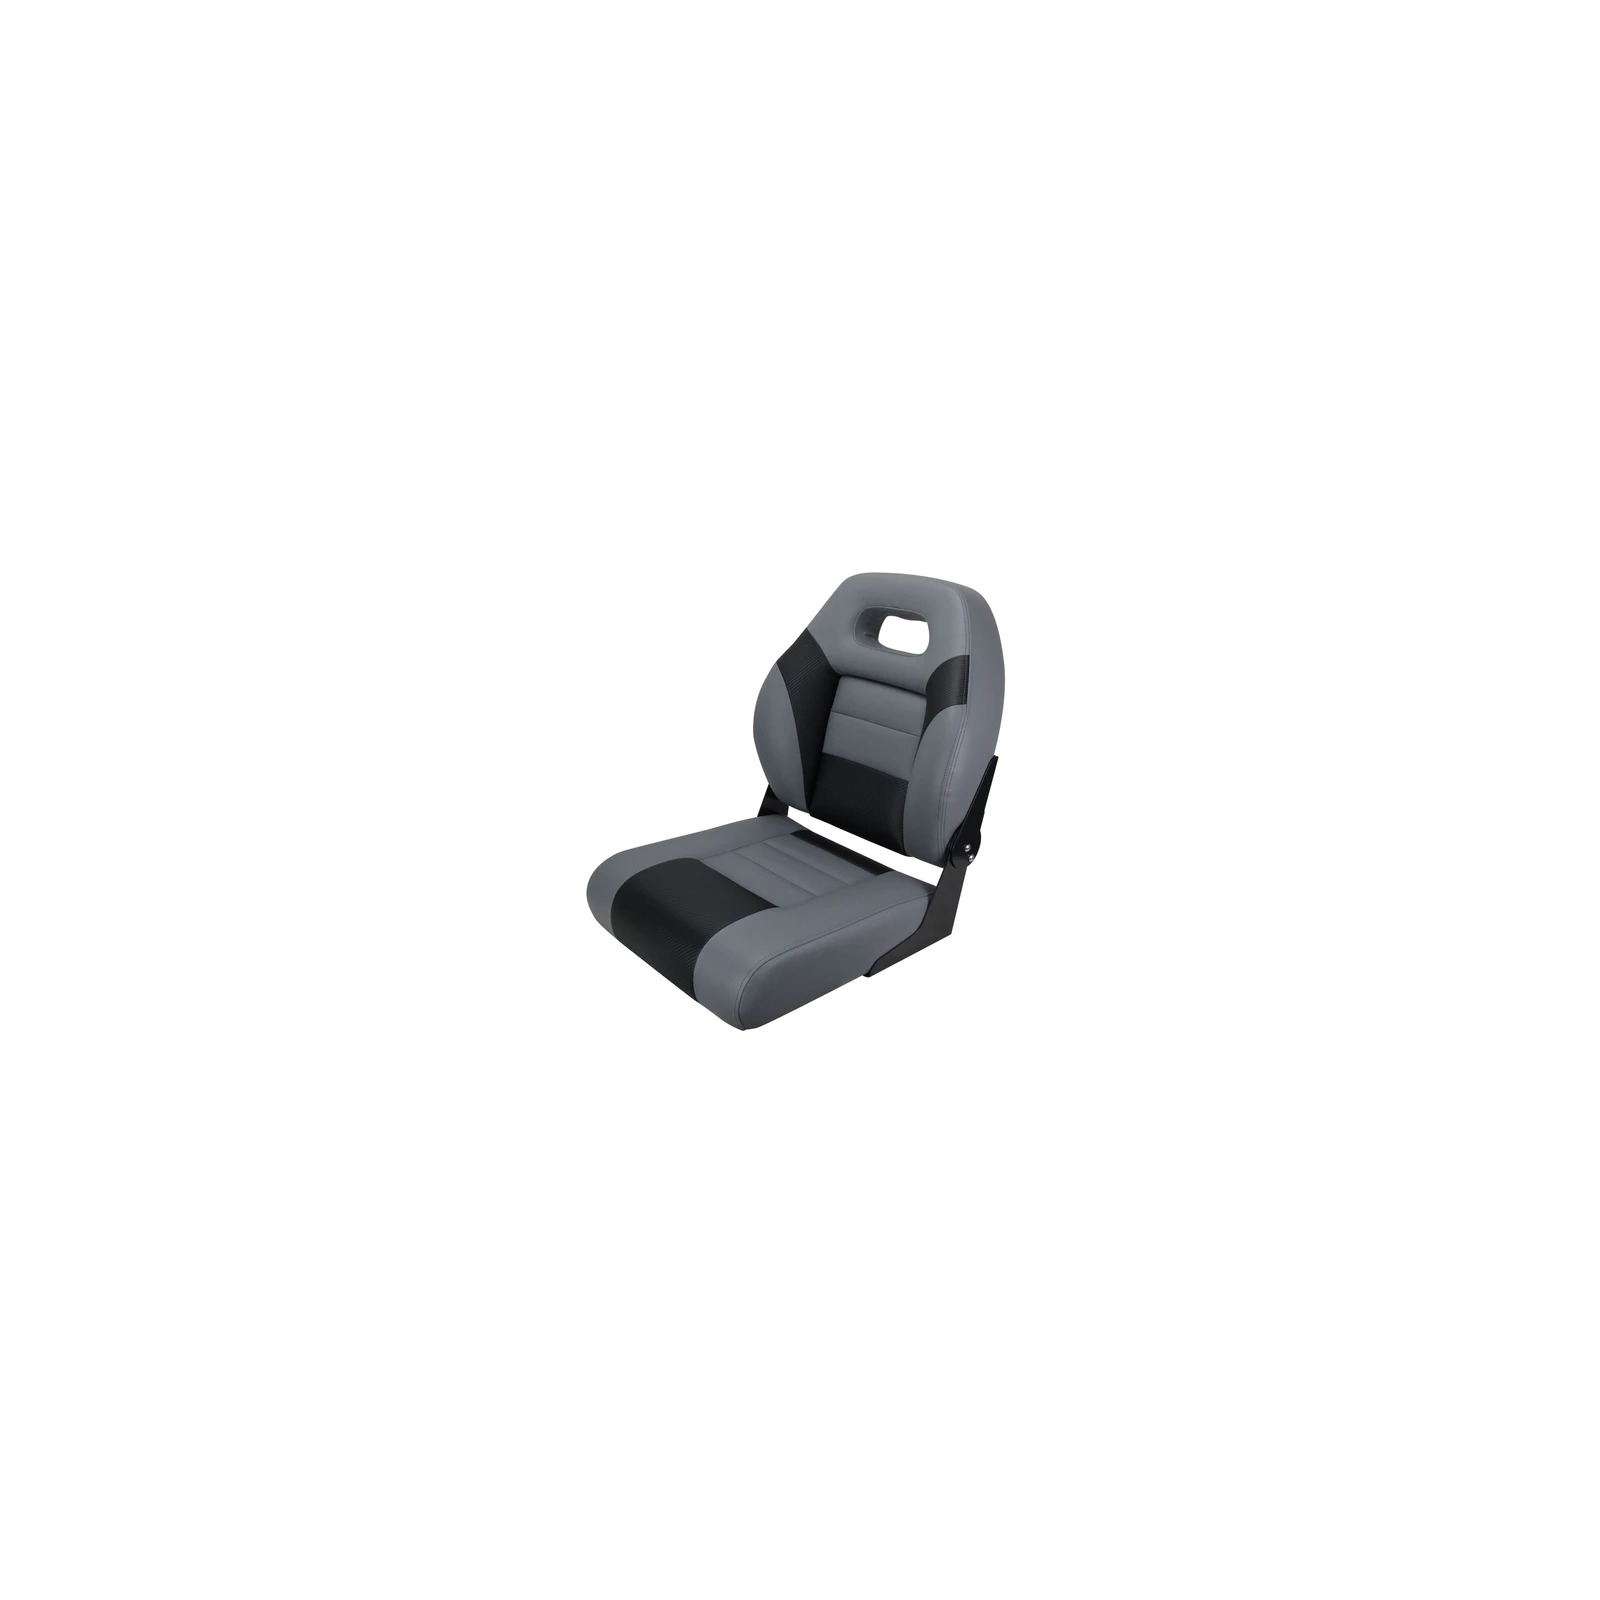 Relaxn® Deluxe Bay Series Boat Seat GREY / BLK 293703 